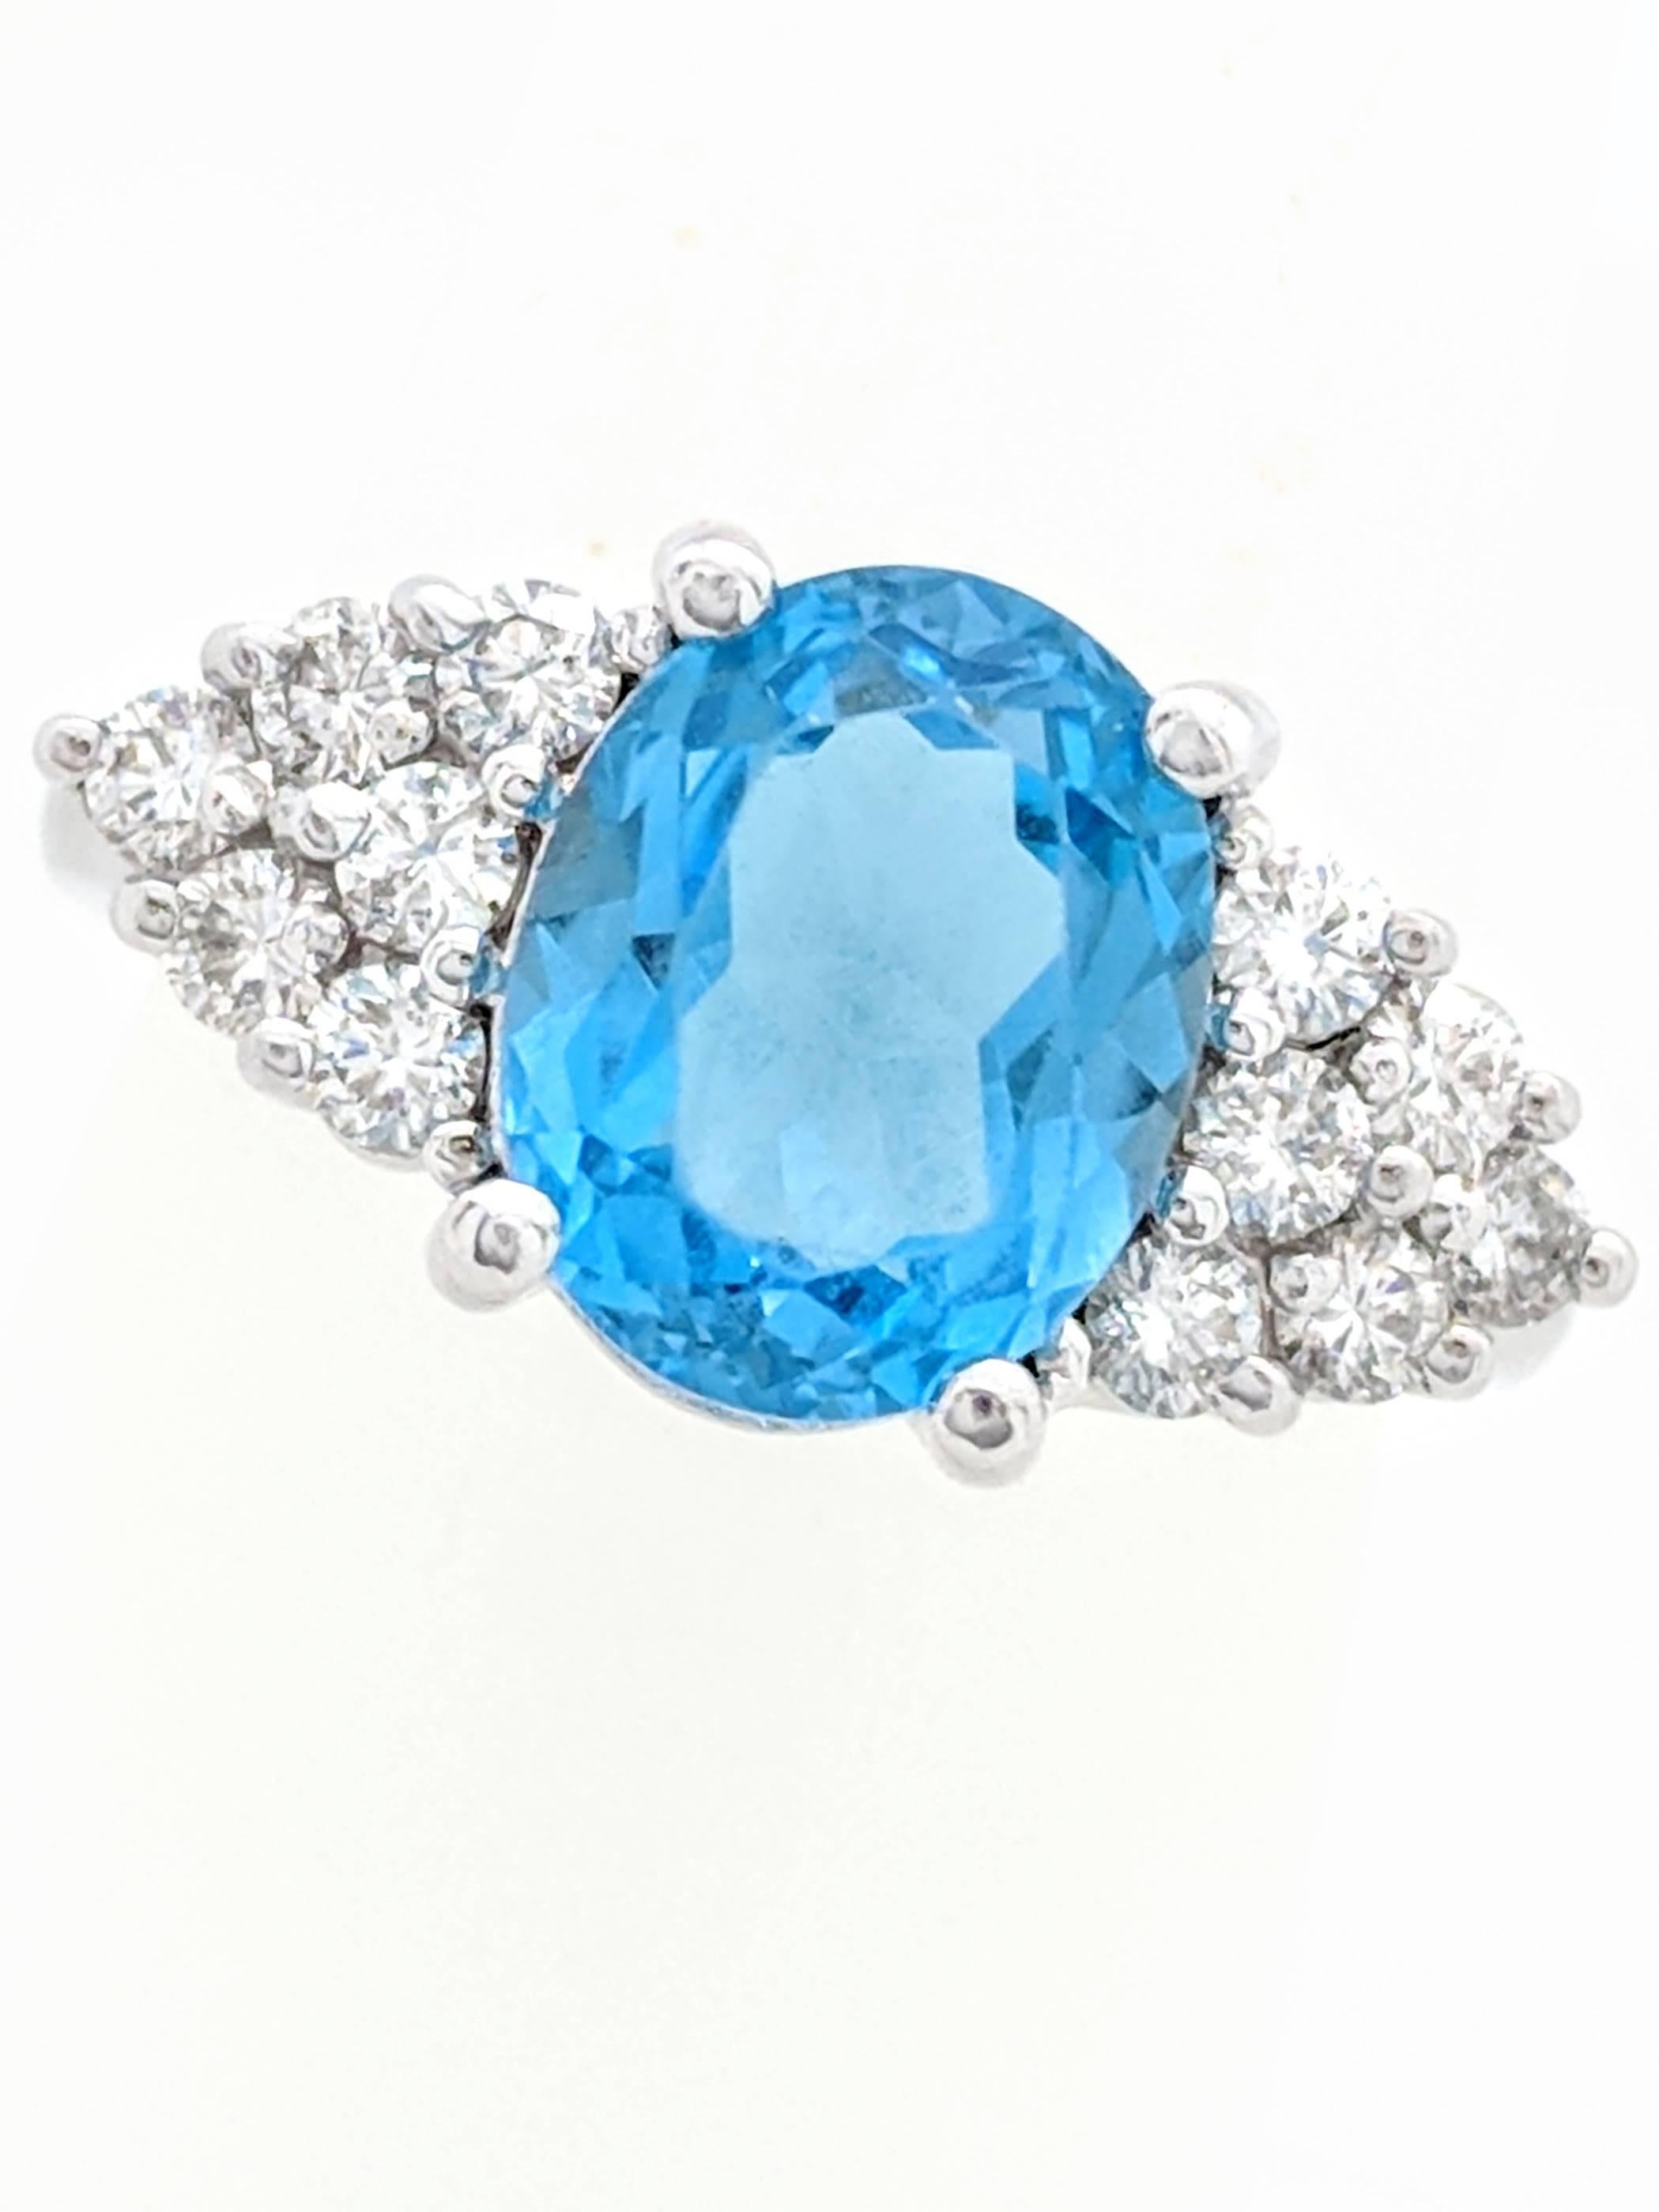  Ladies 14k White Gold 3.50ctw Blue Topaz & Diamond Cocktail Ring Size 6.5

You are viewing a beautiful Blue Topaz and Diamond Cocktail Ring. Any woman would love to add this piece to their collection!

This ring is crafted from 14k white gold and